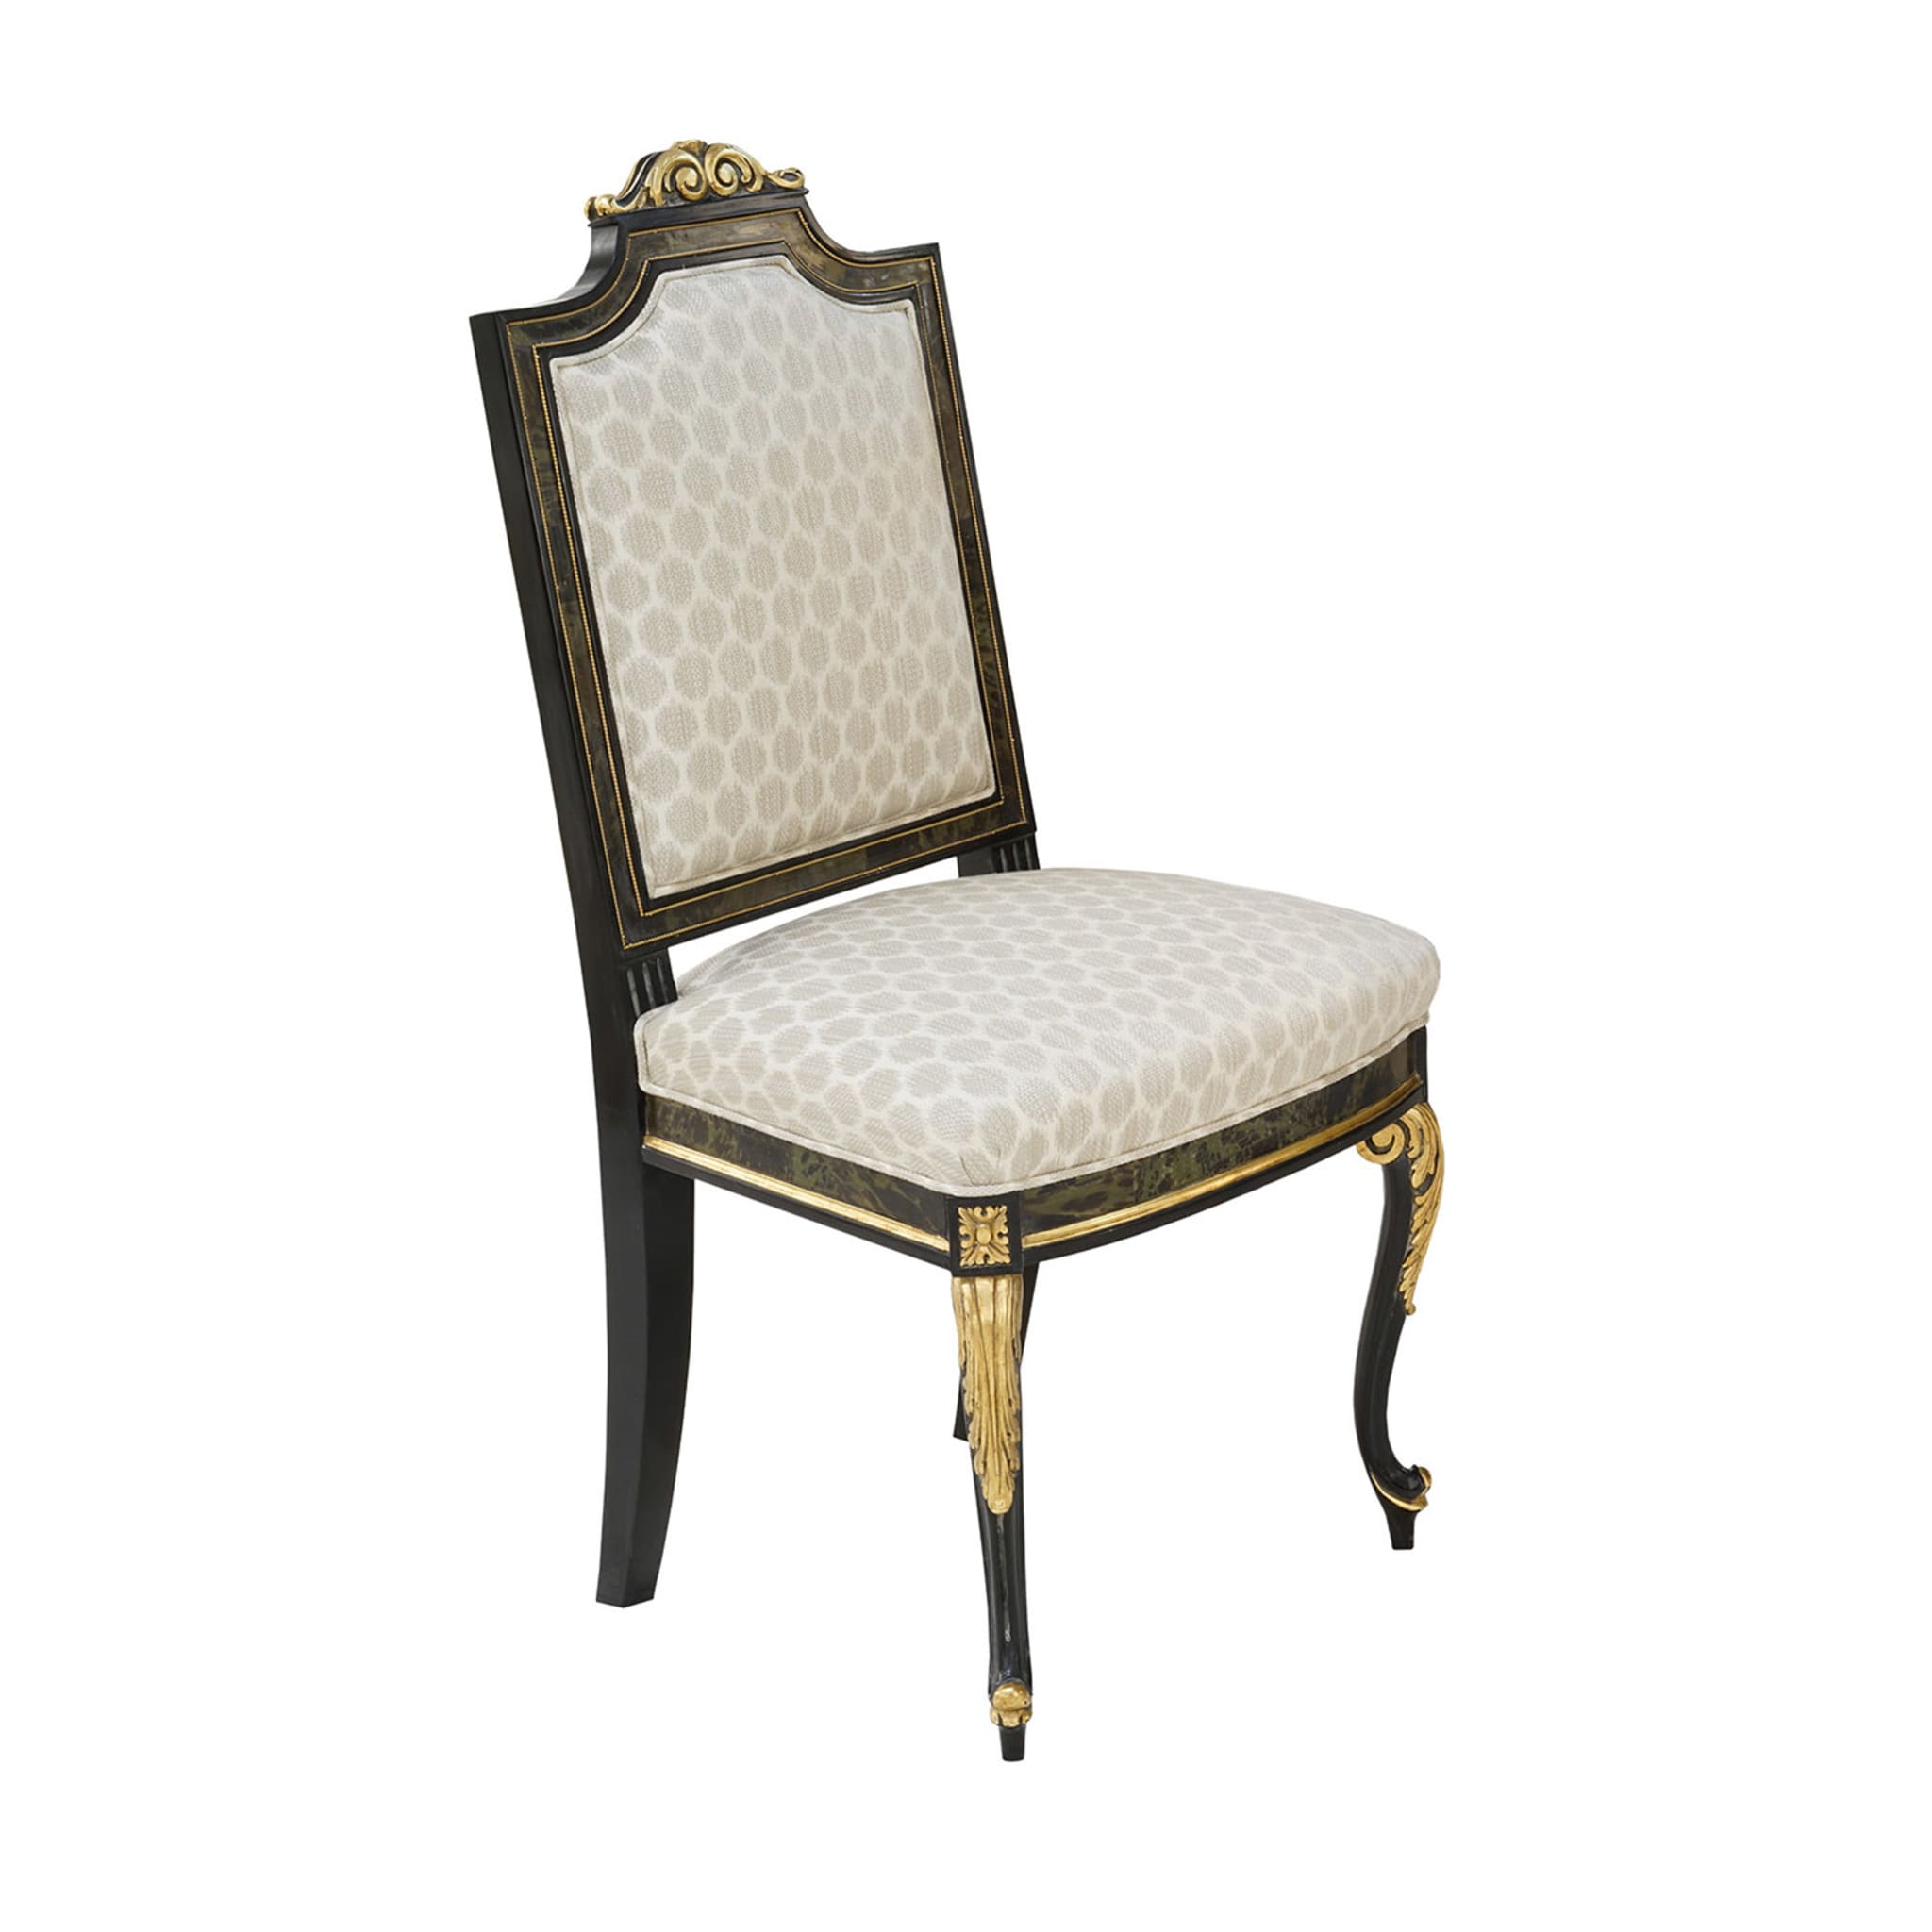 Boulle-style Chair - Main view